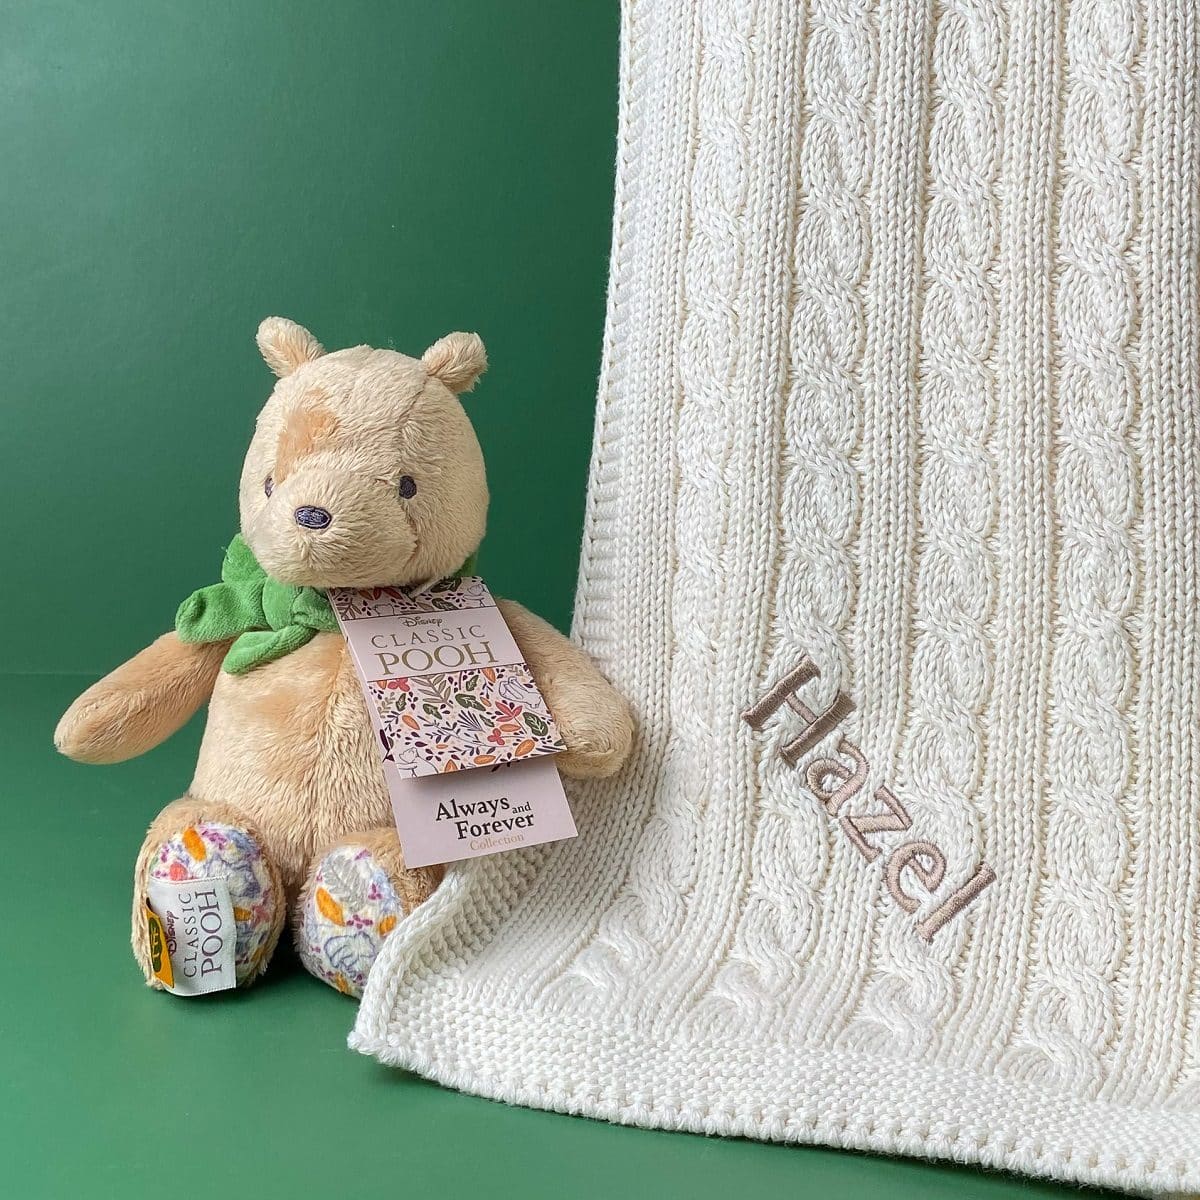 Toffee Moon personalised luxury baby blanket and Winnie the Pooh soft toy